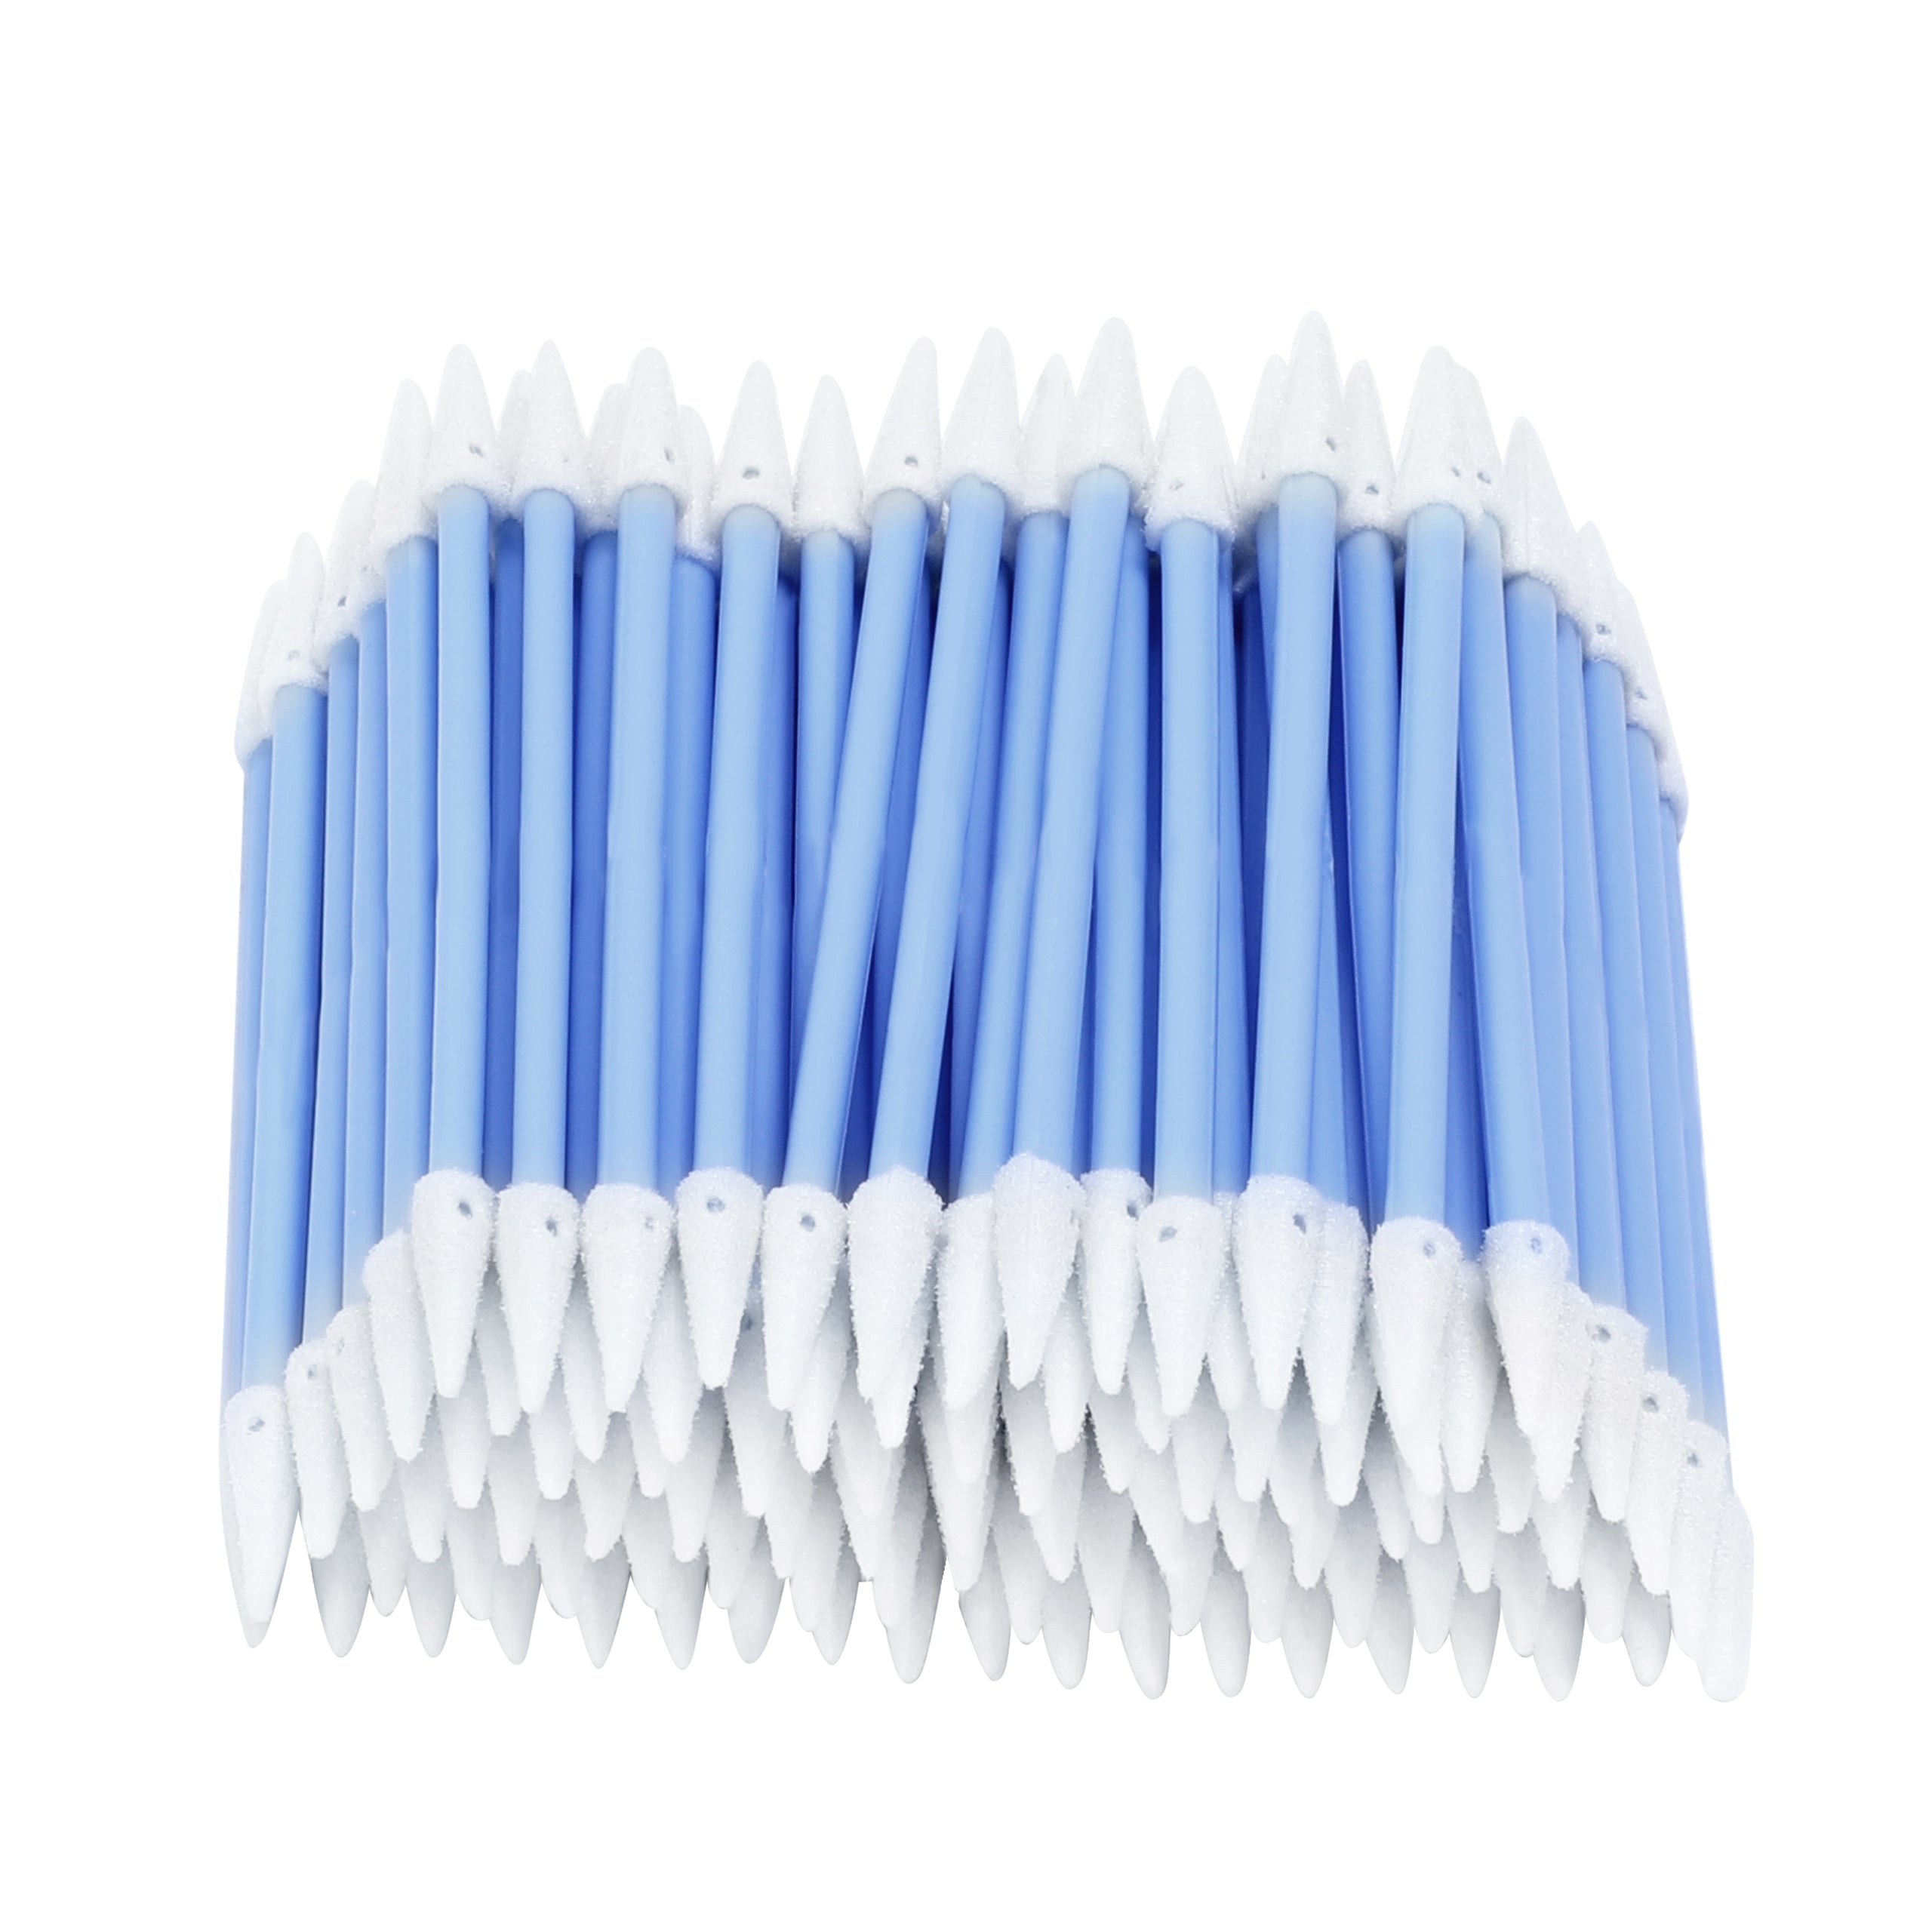 Double-Tipped Cleaning Swabs 2.9" (1,000pcs Black 3.2 mm Head, 73 mm Length), Foam Tips Swabs (No. D7230)